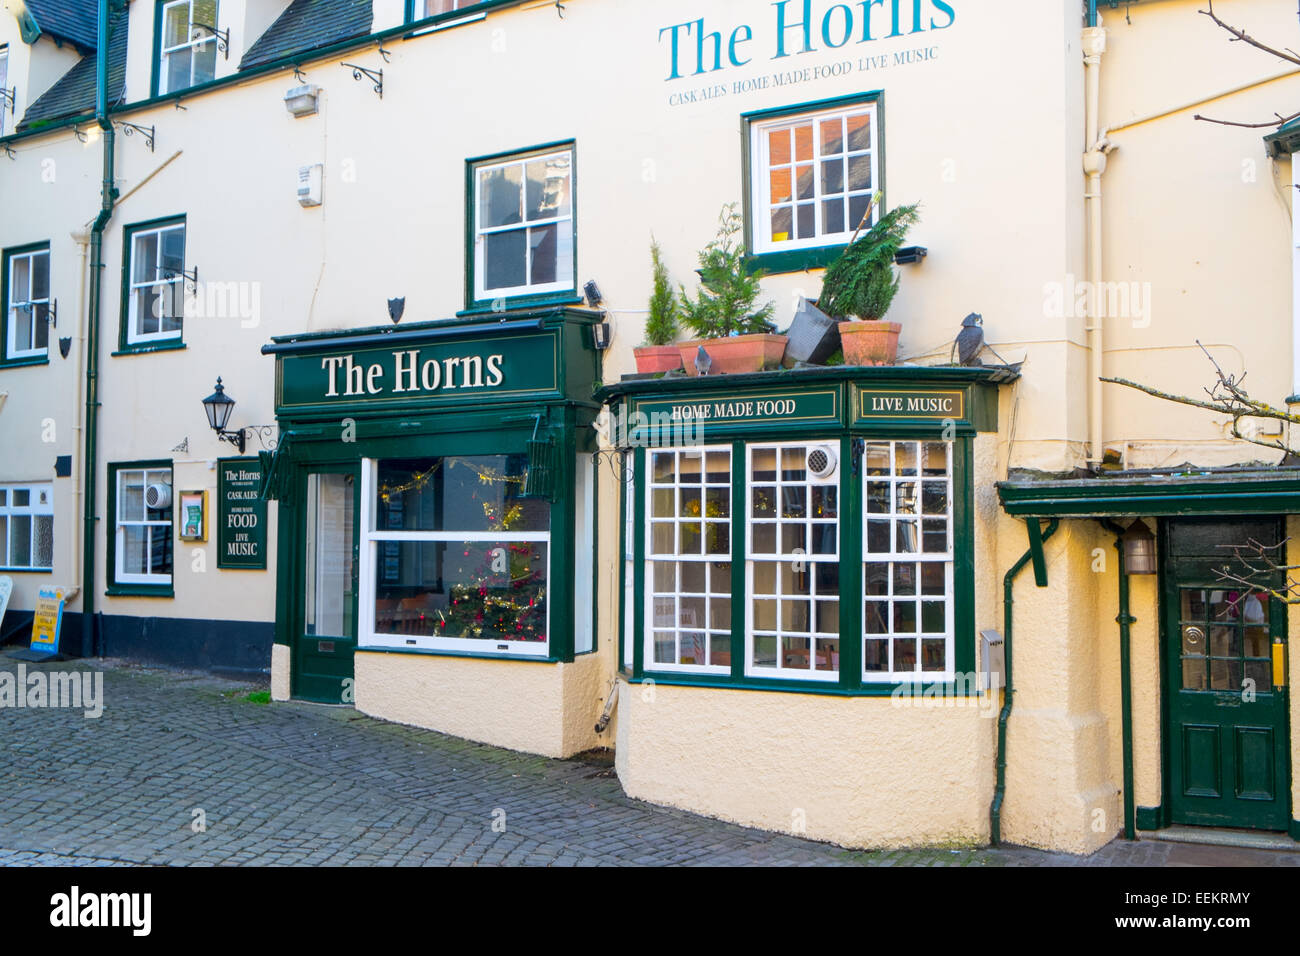 The Horns public house in the market area of Ashbourne,Derbyshire,England Stock Photo